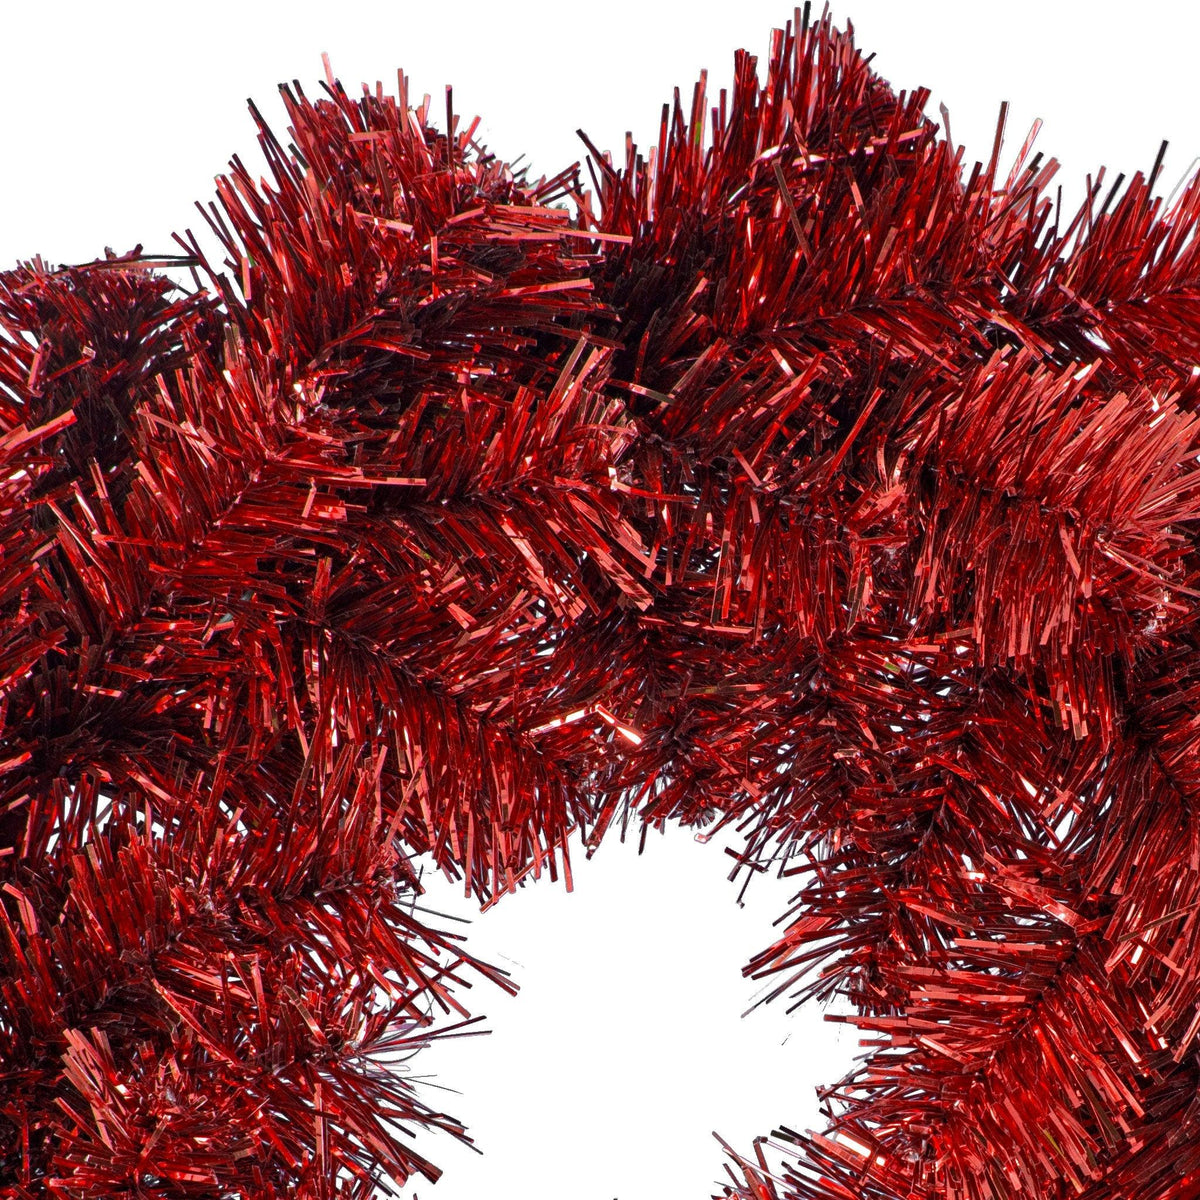 18IN Shiny Red Tinsel Christmas Wreaths! Decorative 18in Diameter door hanging wreaths made by Lee Display.